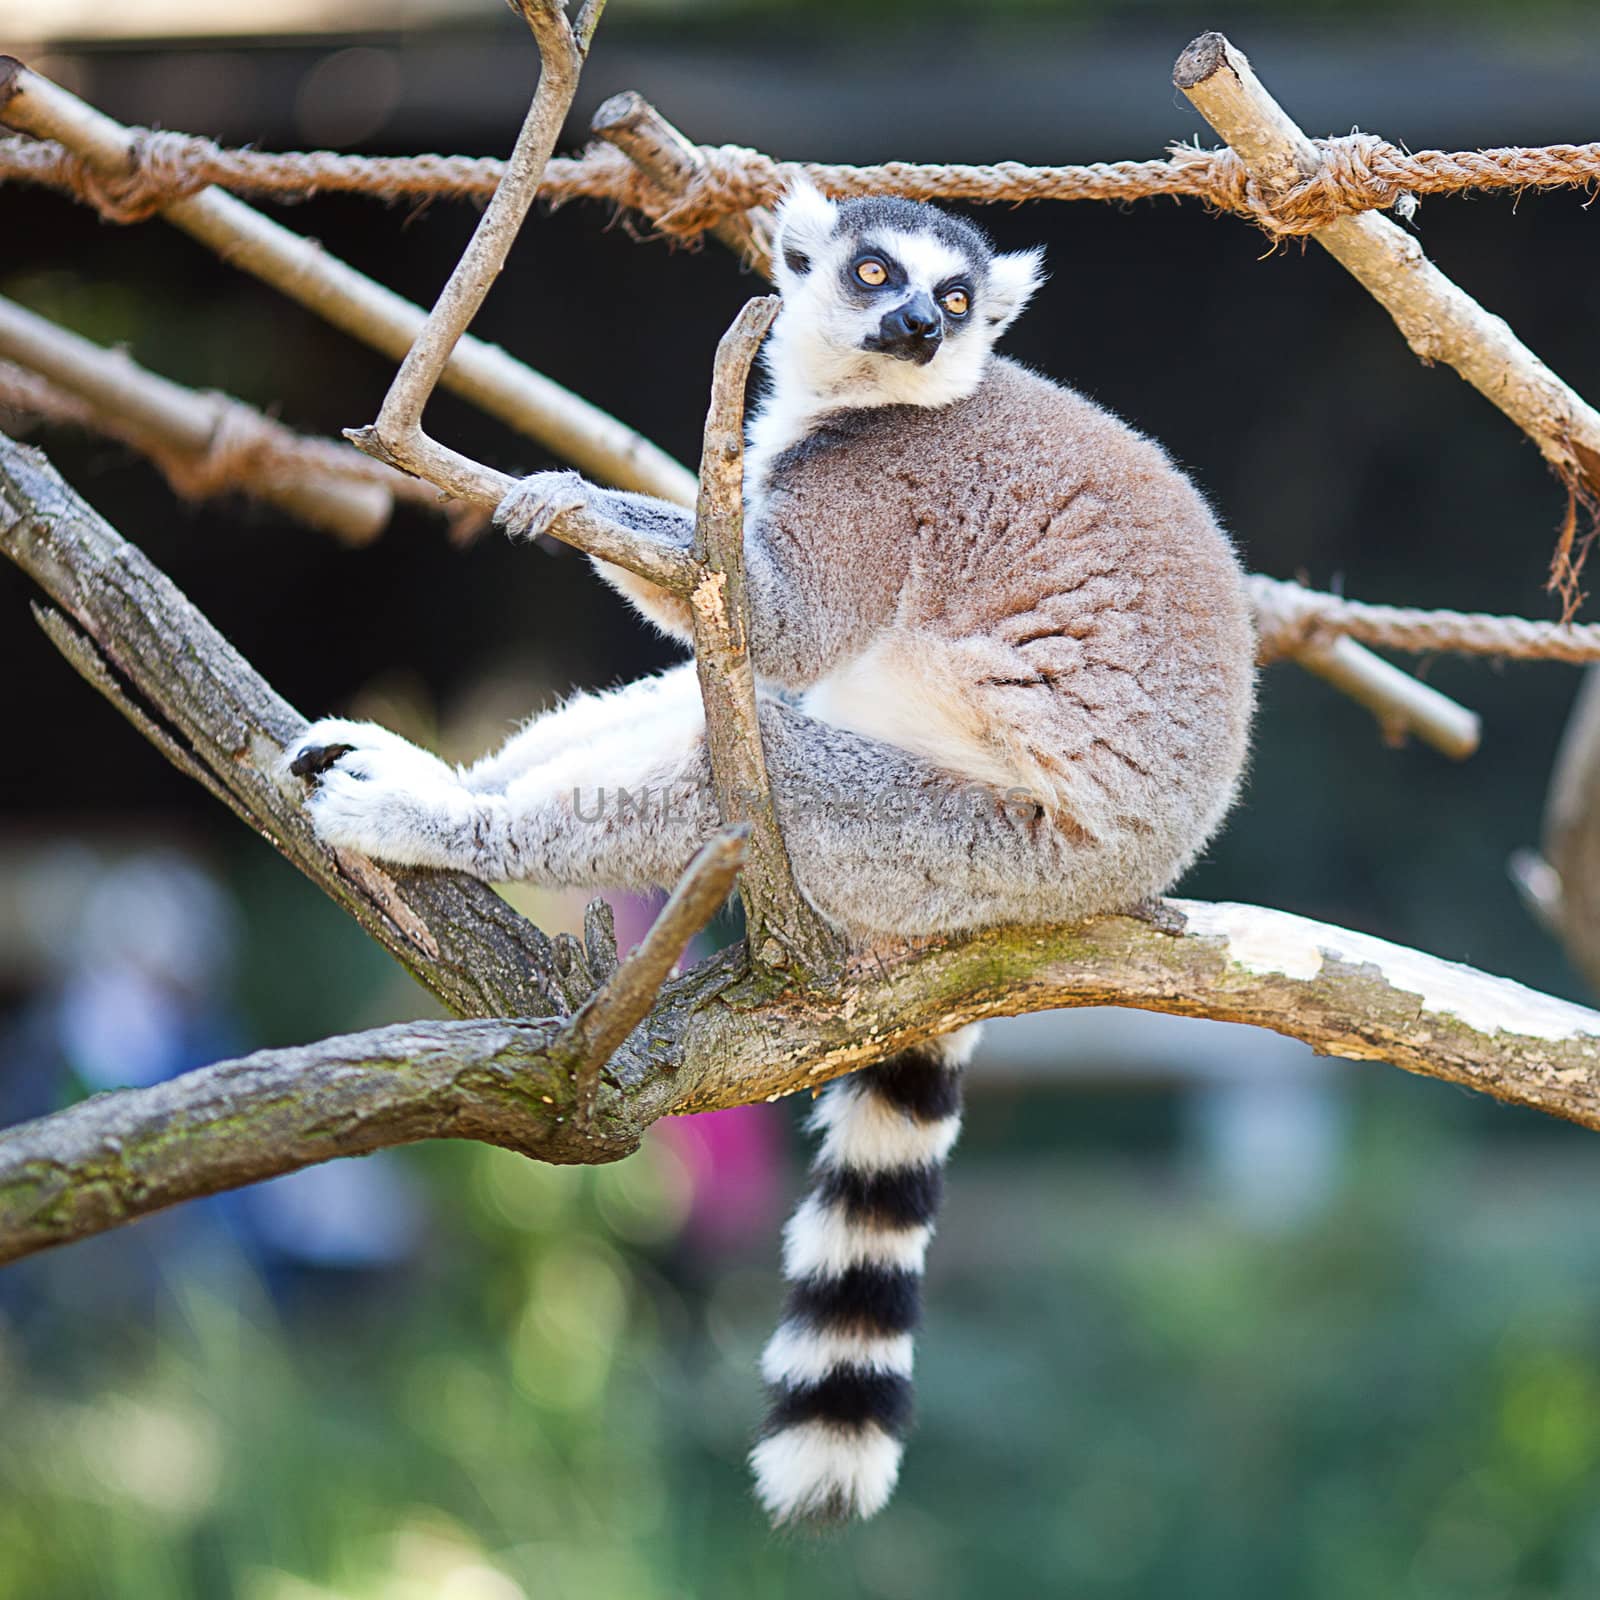 lemur sitting on the branches at the zoo